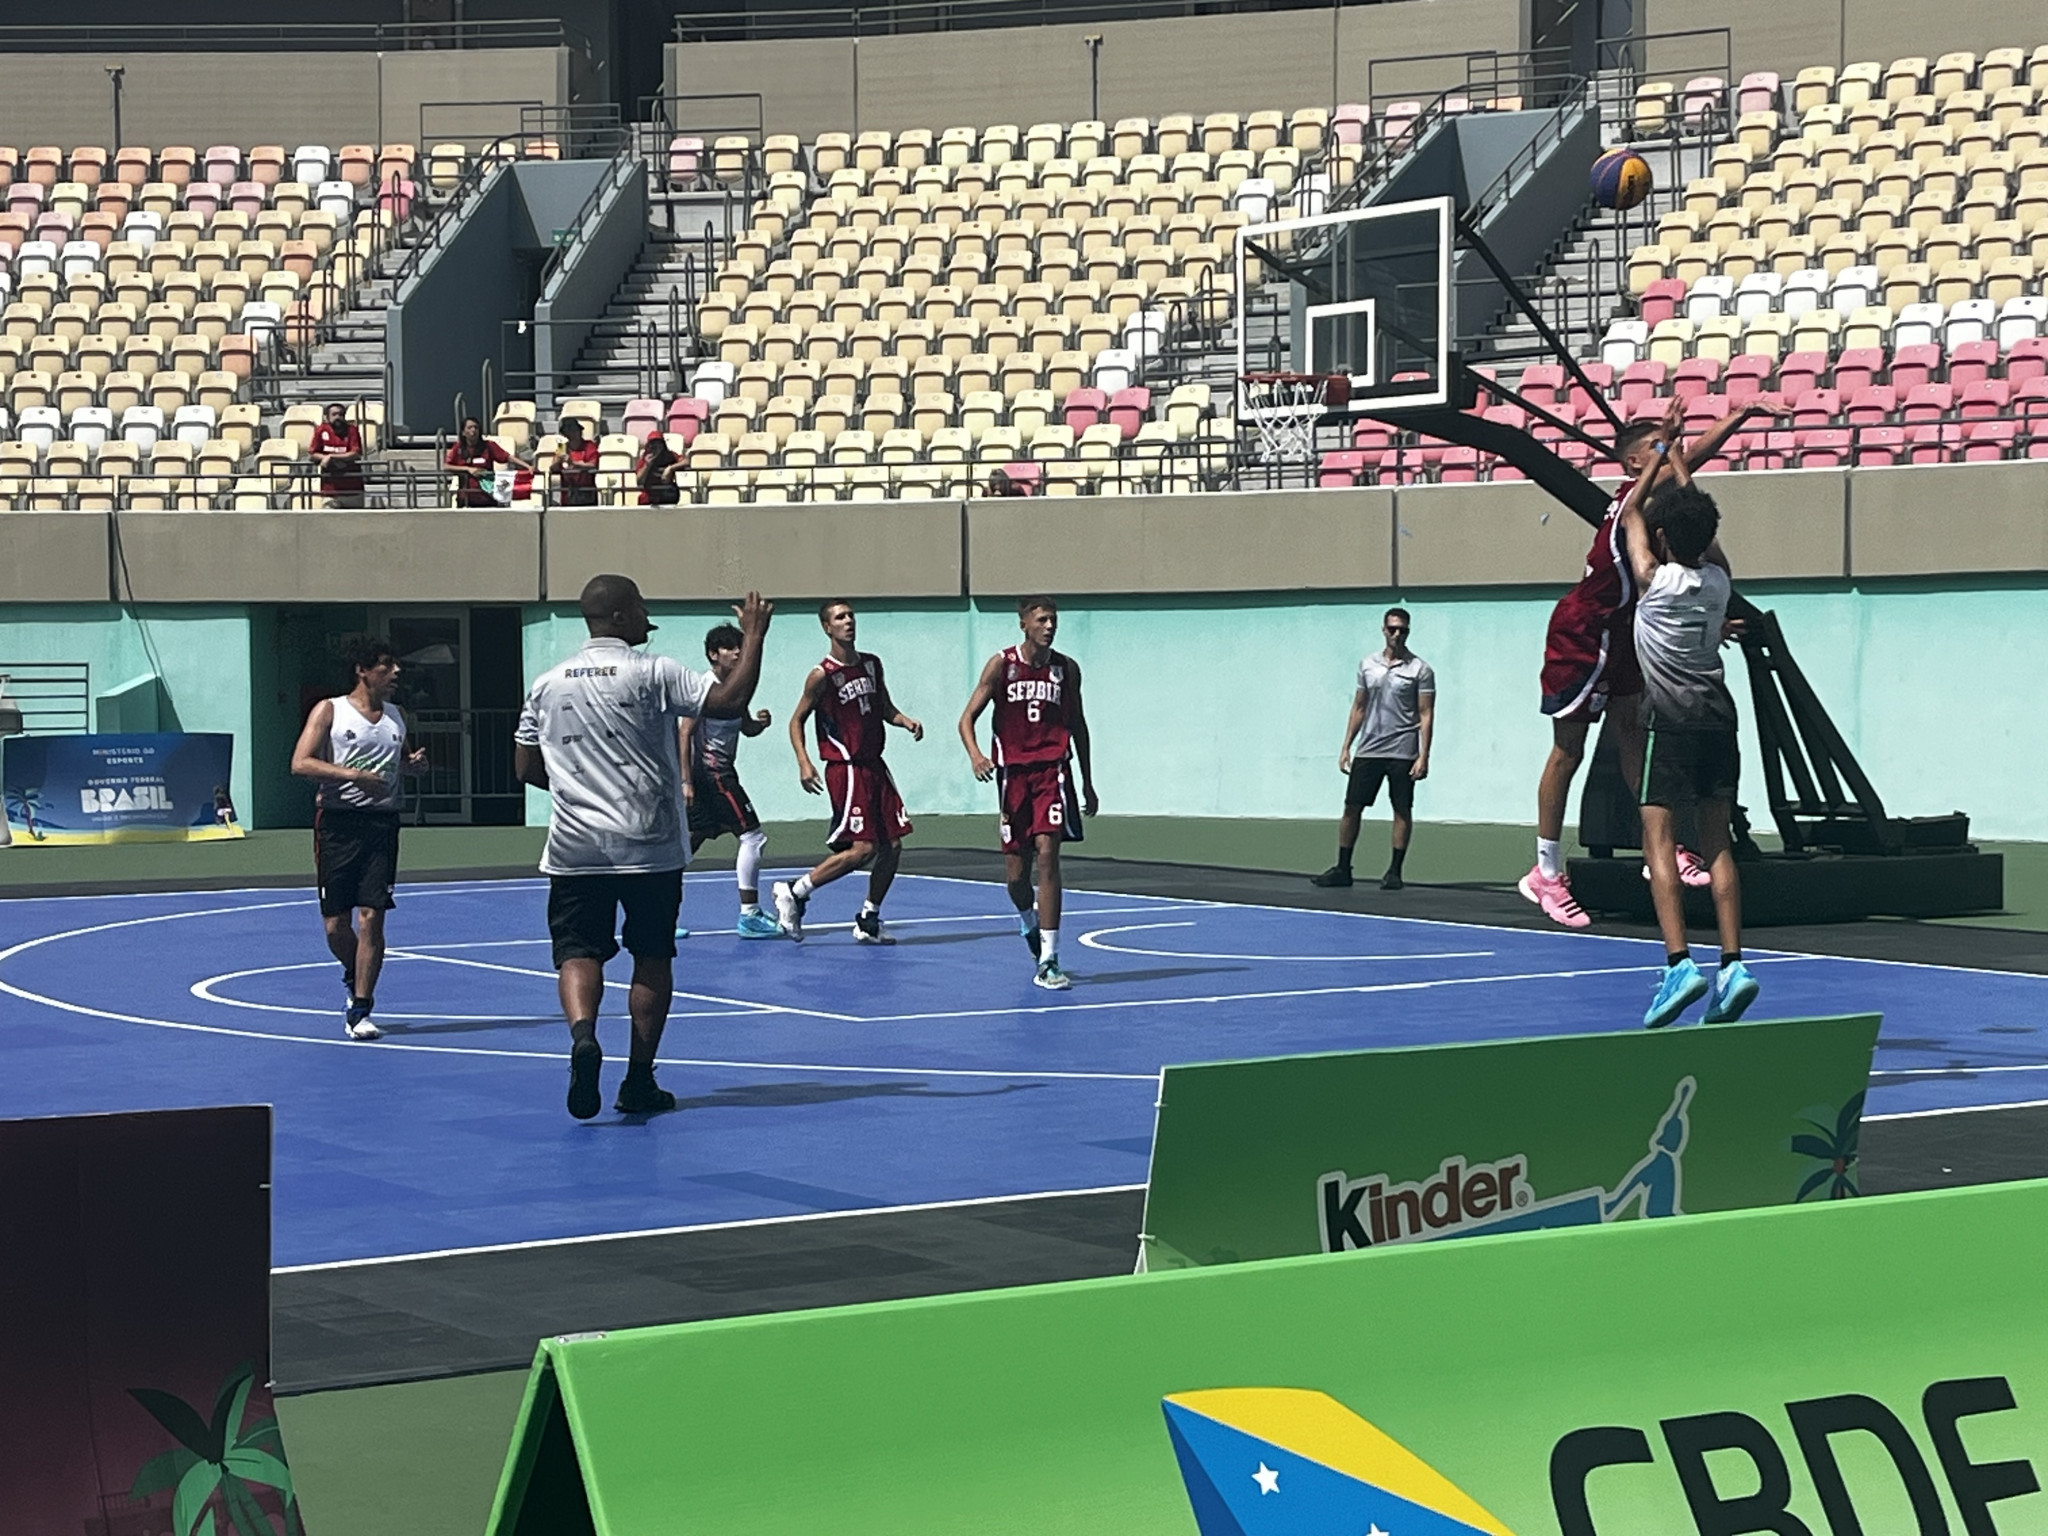 Sports on display on day one included 3x3 basketball ©ITG